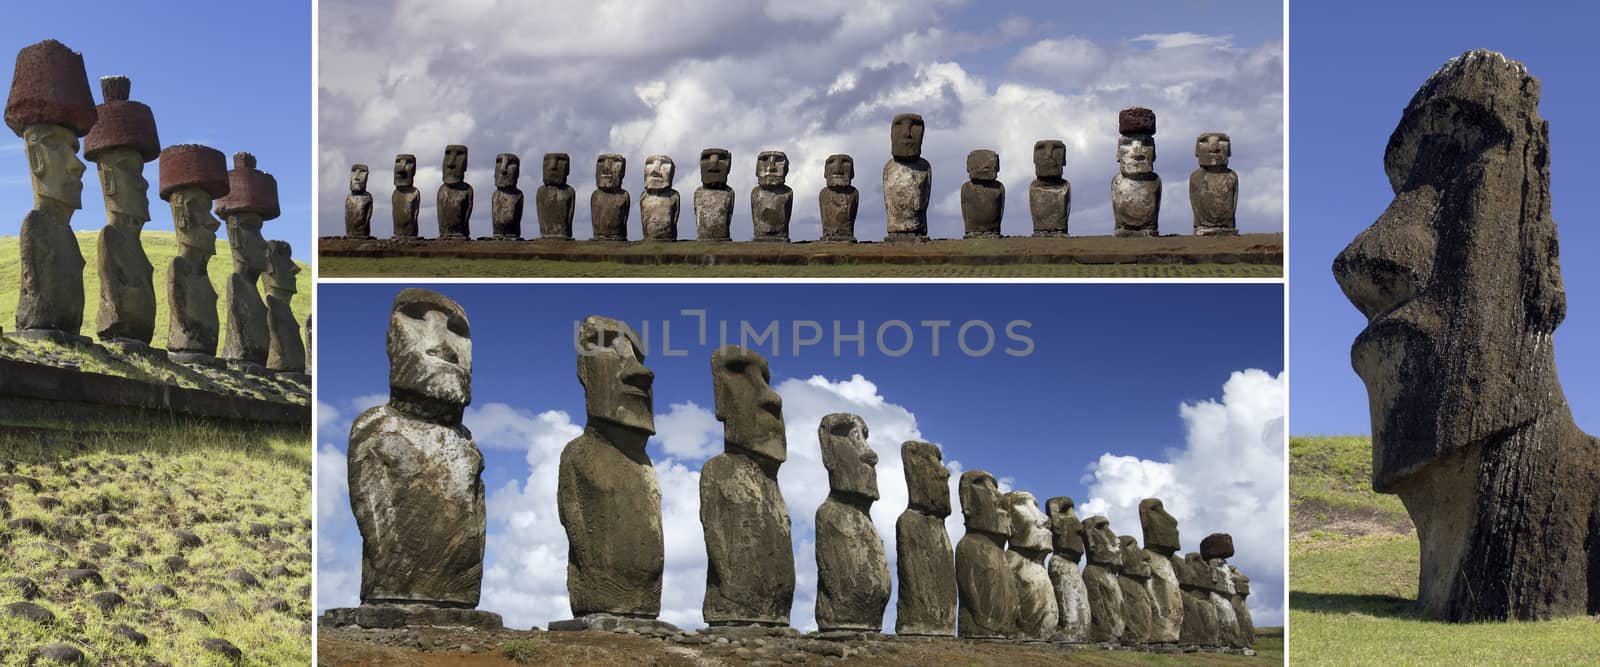 The Moai of Easter Island in the South Pacific. Easter Island is famous for its 887 monumental statues, called moai, created by the early Rapa Nui people. In 1995, UNESCO named Easter Island a World Heritage Site.